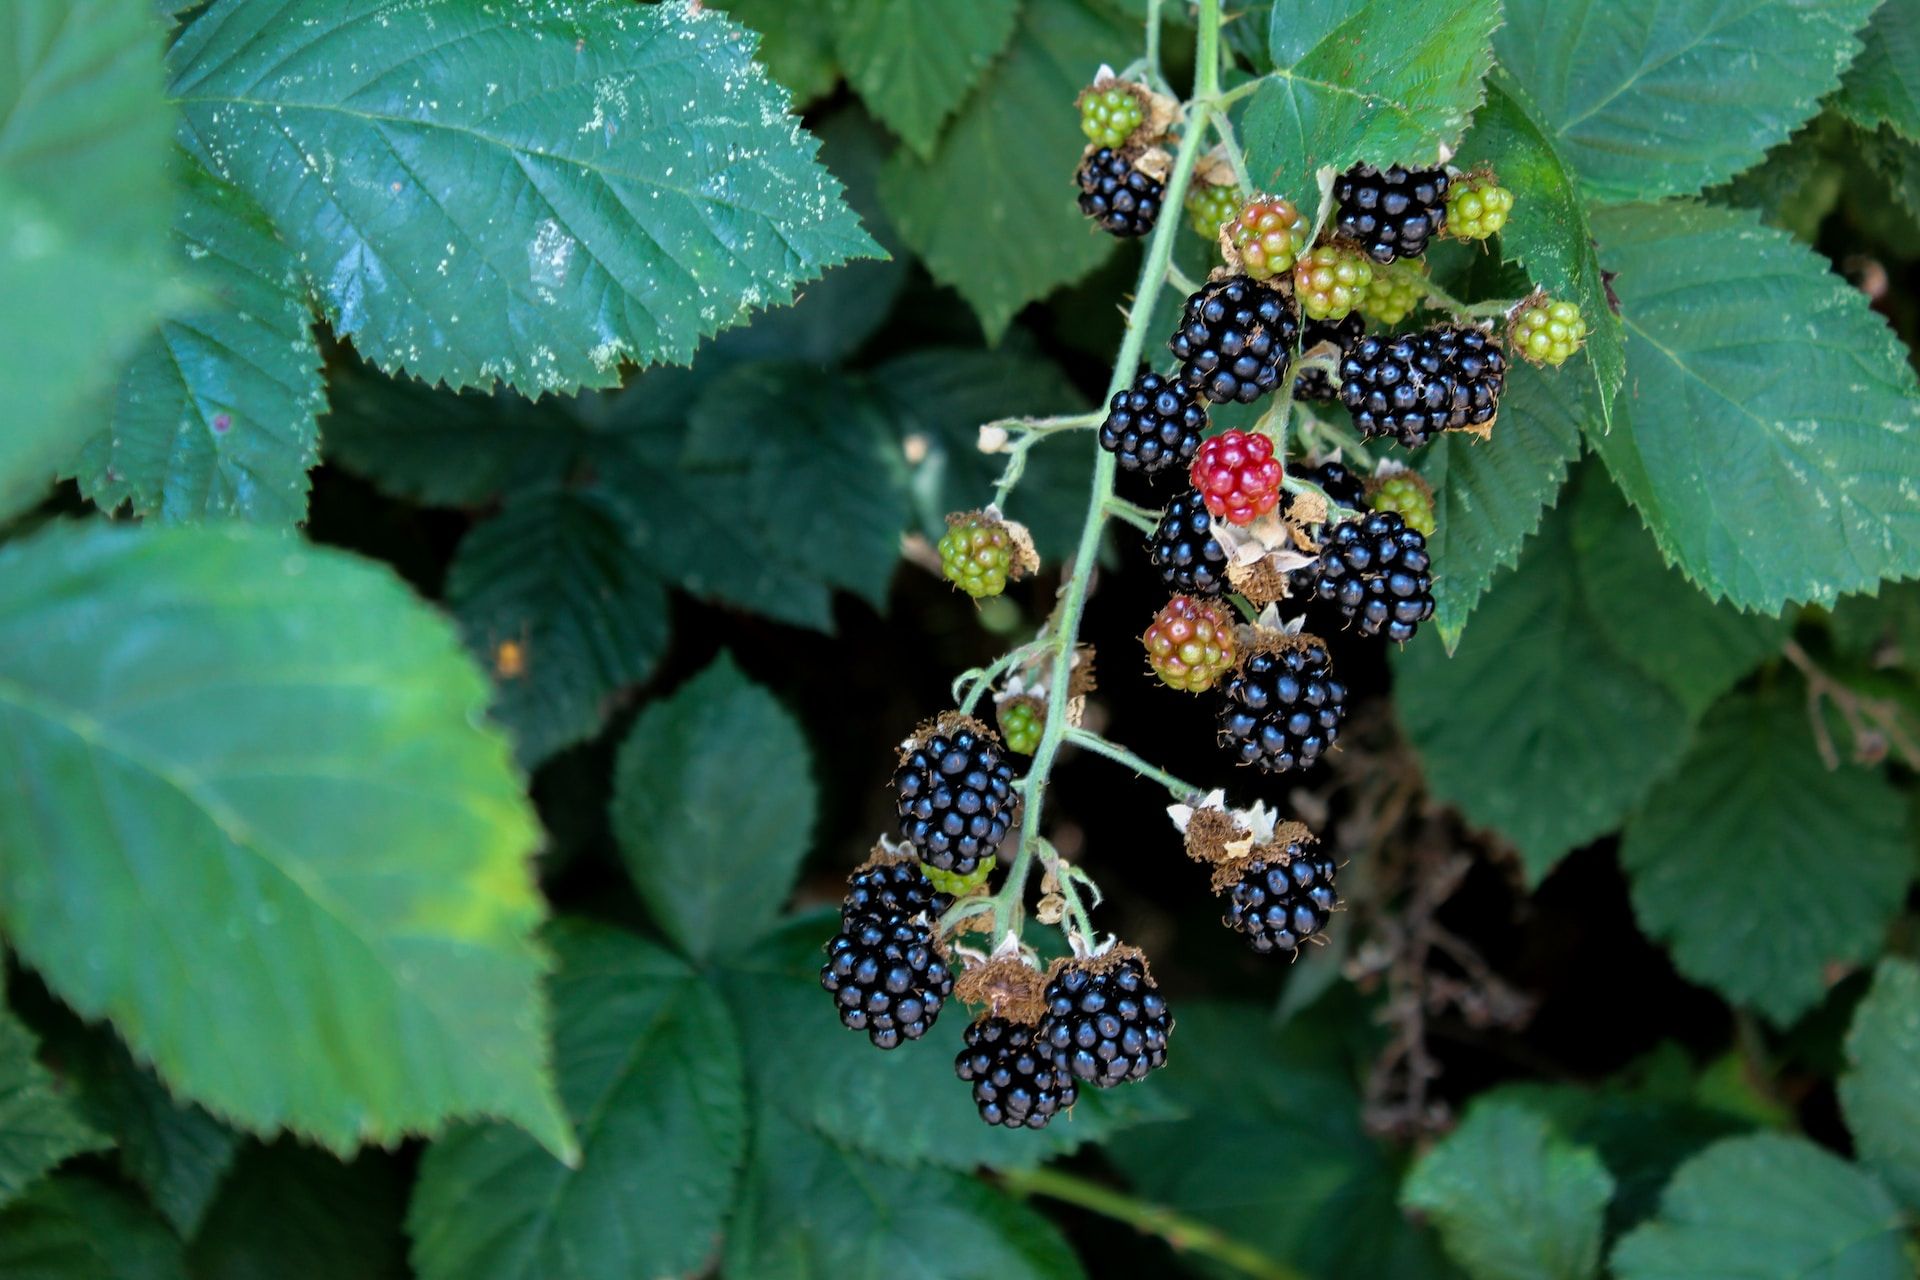 A bunch of ripe blackberries ready to be picked